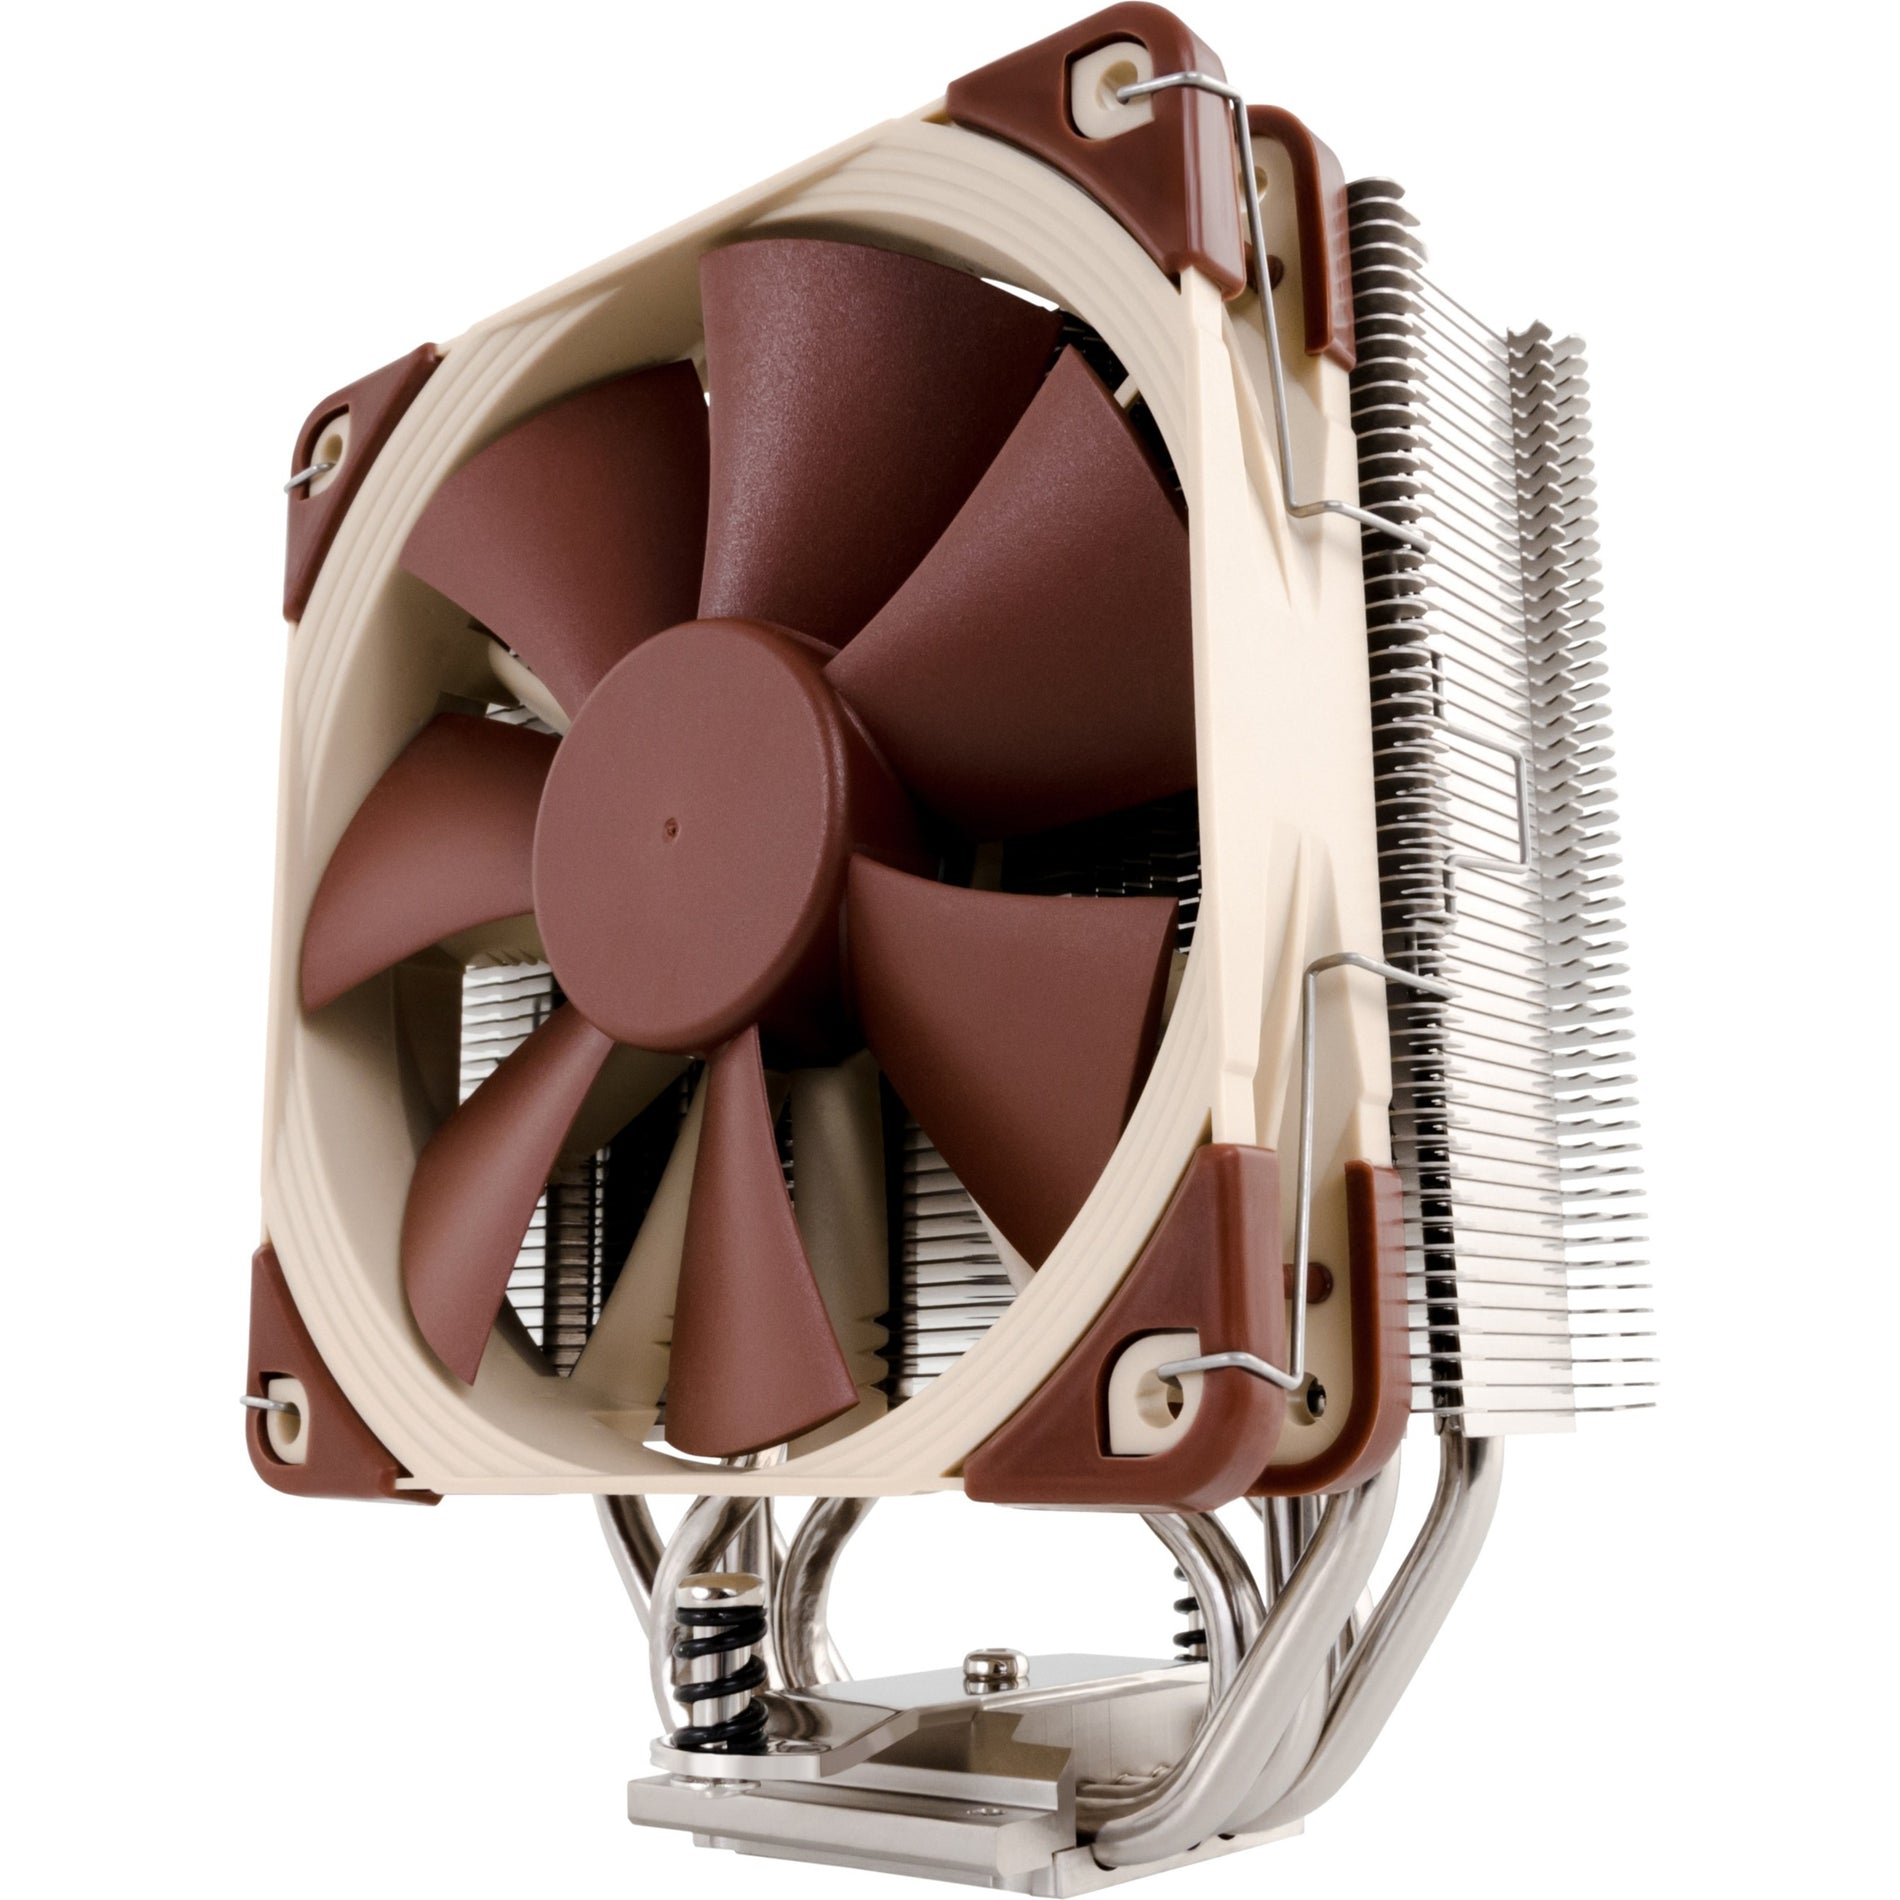 Noctua NH-U12S Cooling Fan/Heatsink, High Performance CPU Cooler for Quiet and Efficient Cooling